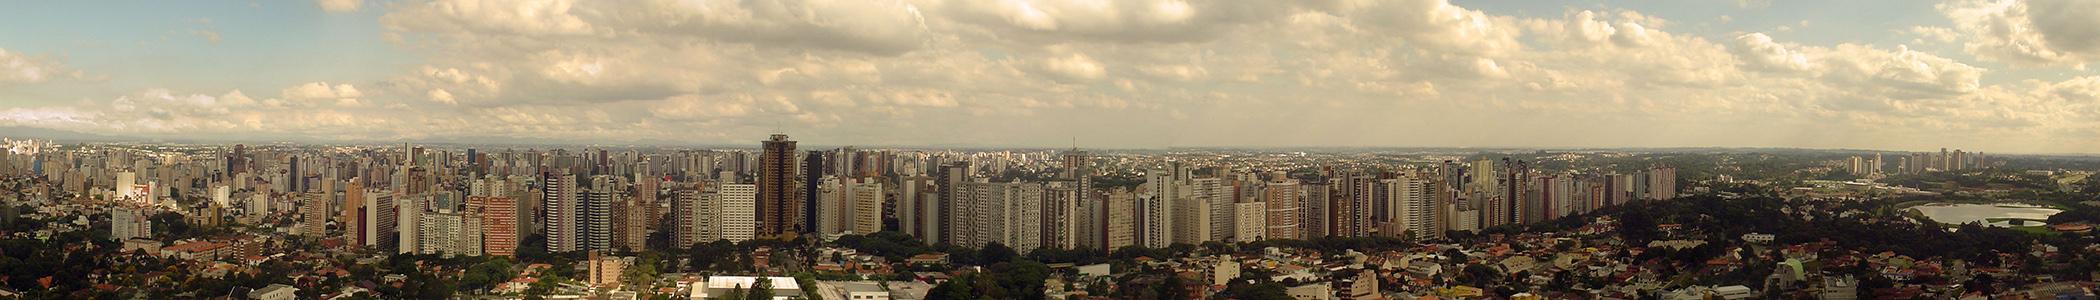 Banner image for Curitiba on GigsGuide